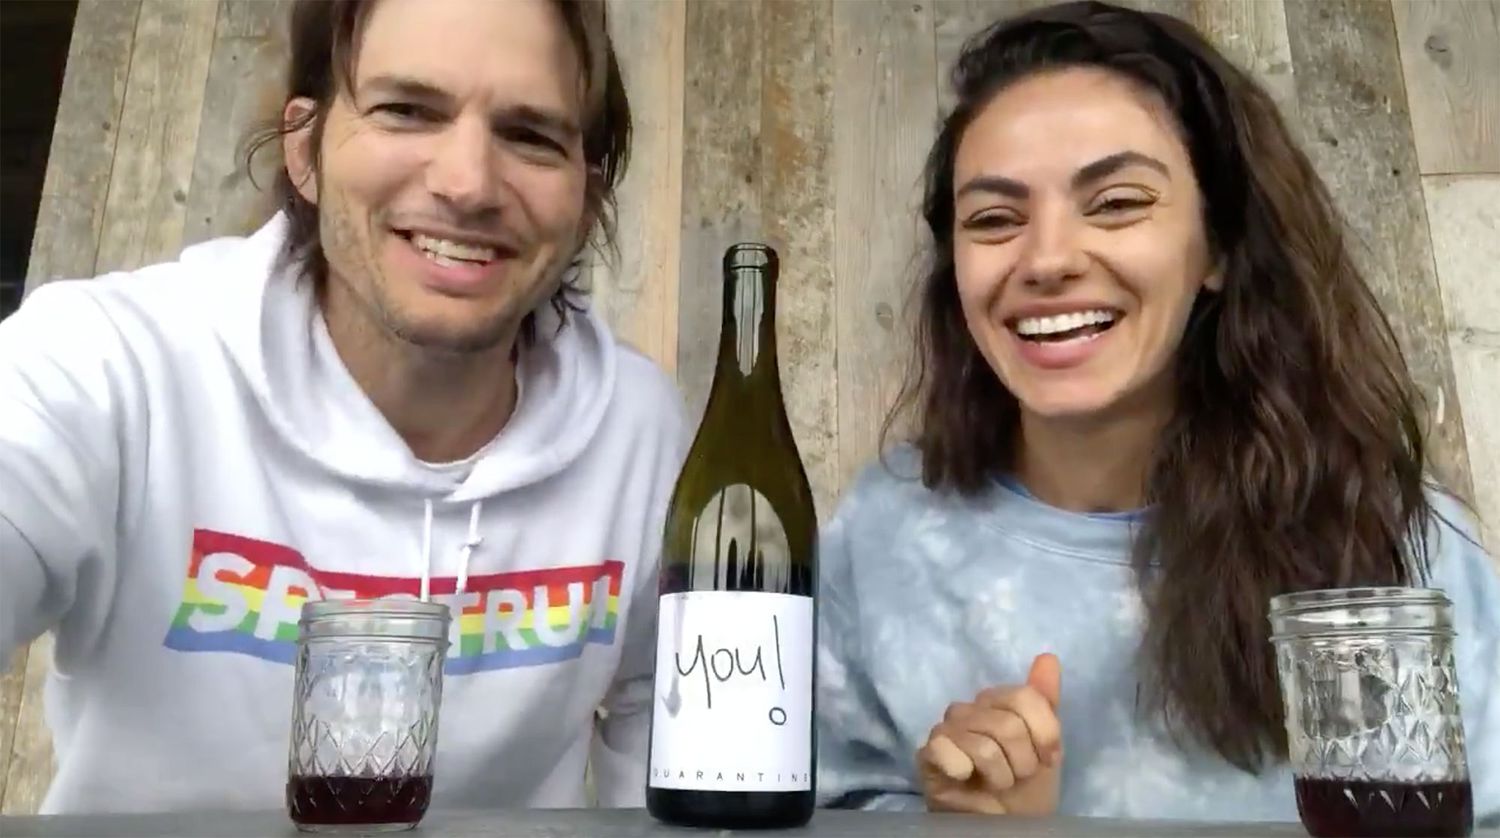 Screenshot of Mila Kunis and Ashton Kutcher from a video announcing the release of their new wine project in 2020.